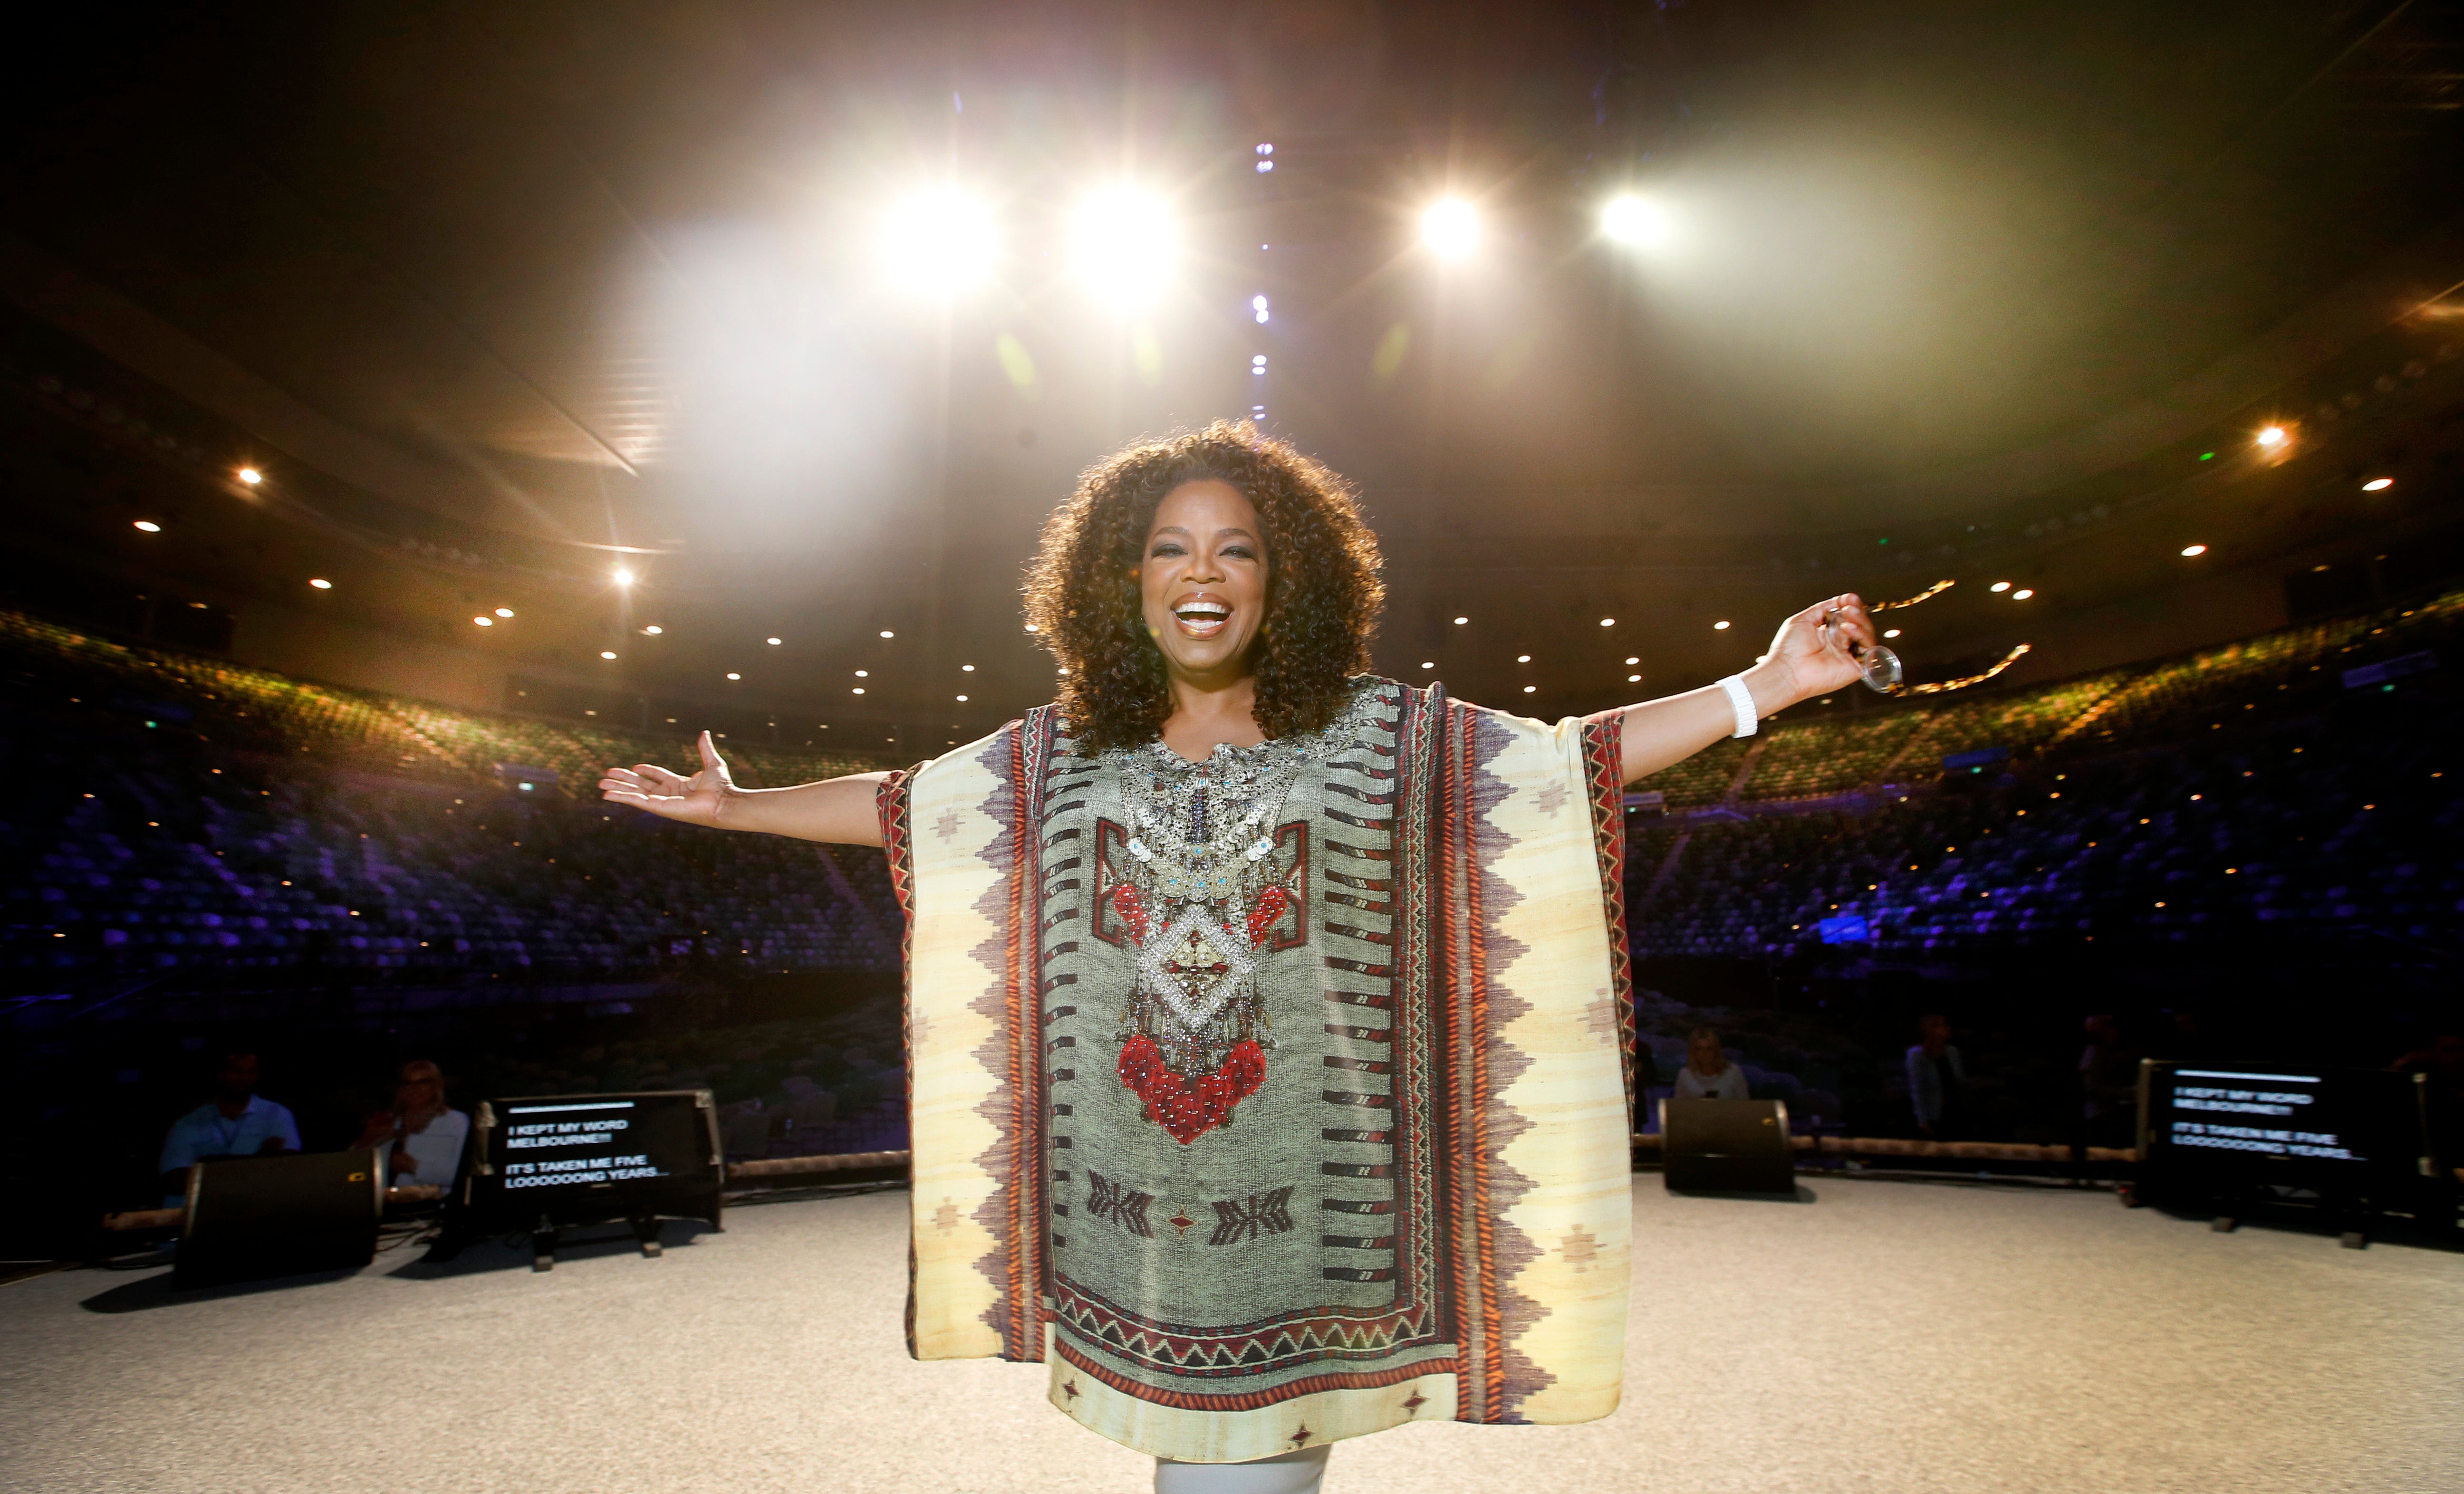 Oprah Winfrey Doesn’t Care How Much She Weighs
